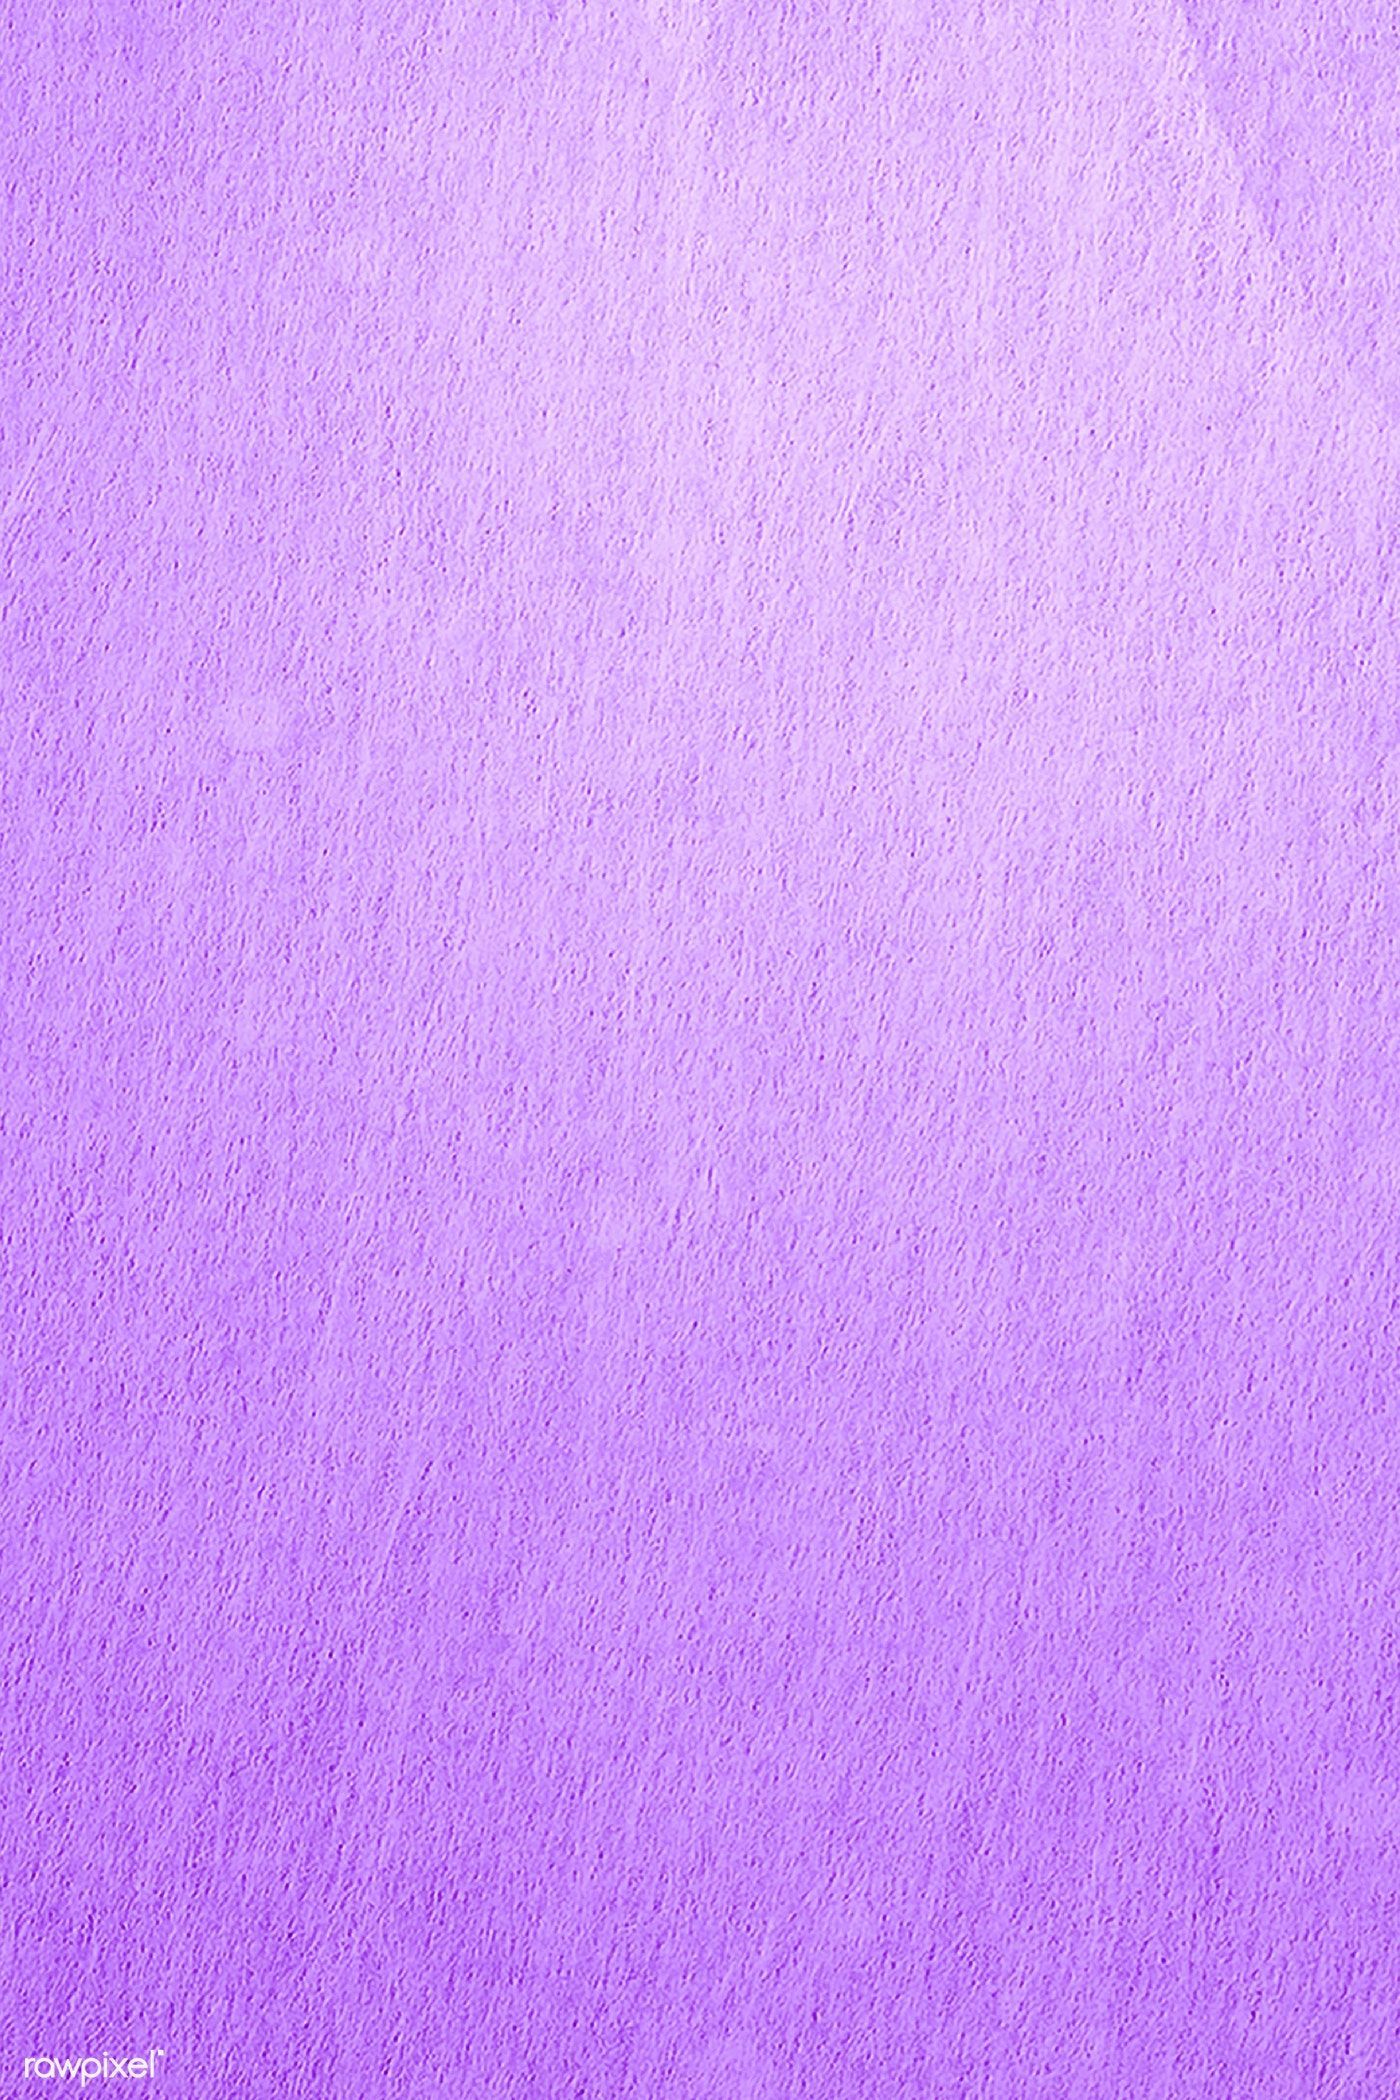 Natural purple paint texture background. free image / katie. Textured background, Purple paint, Texture painting